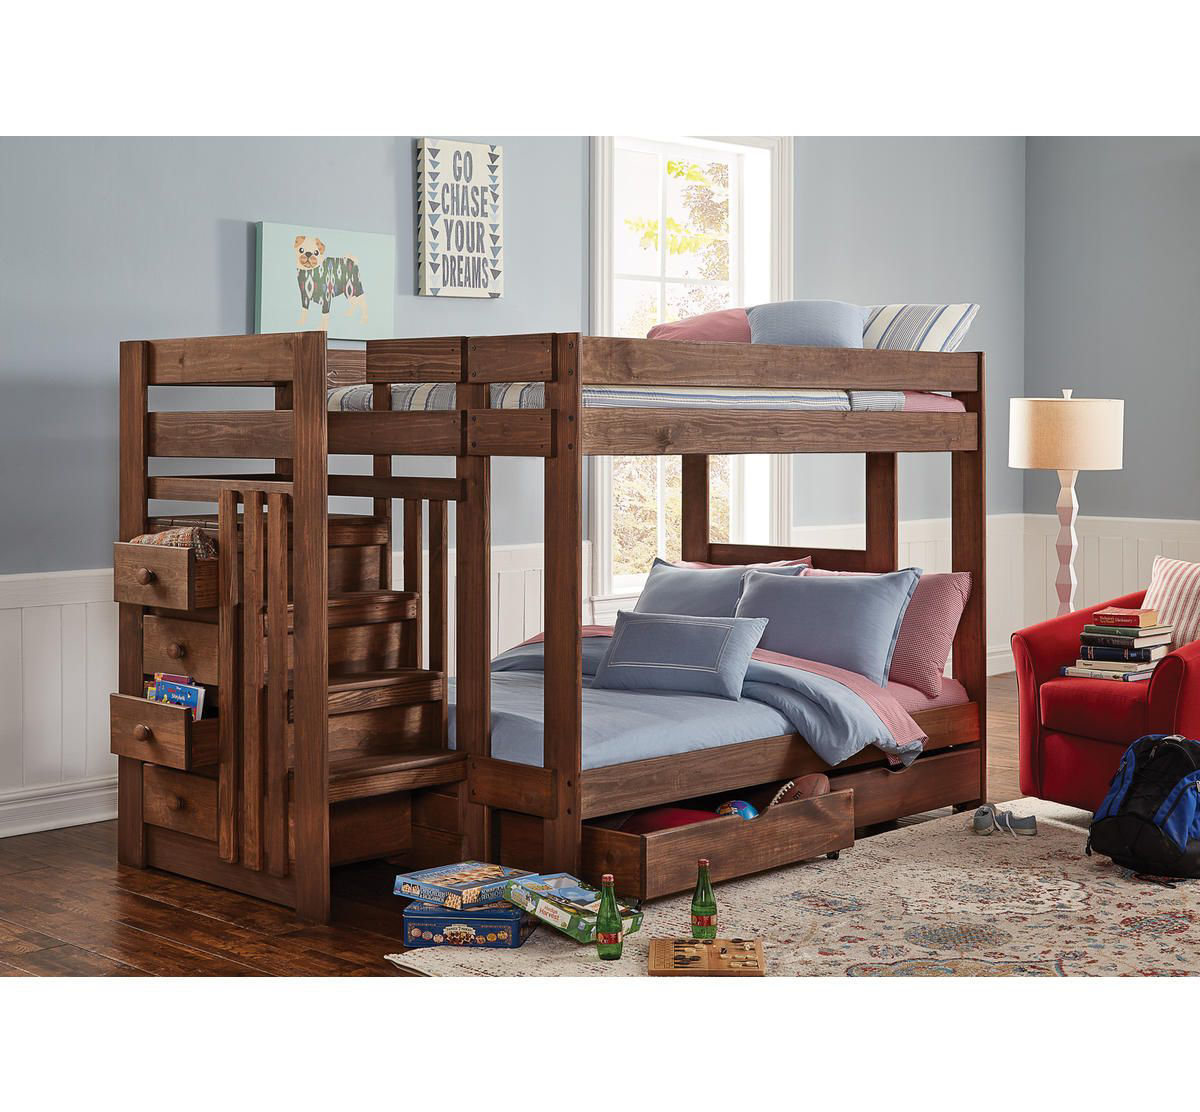 wooden bunk beds for sale near me